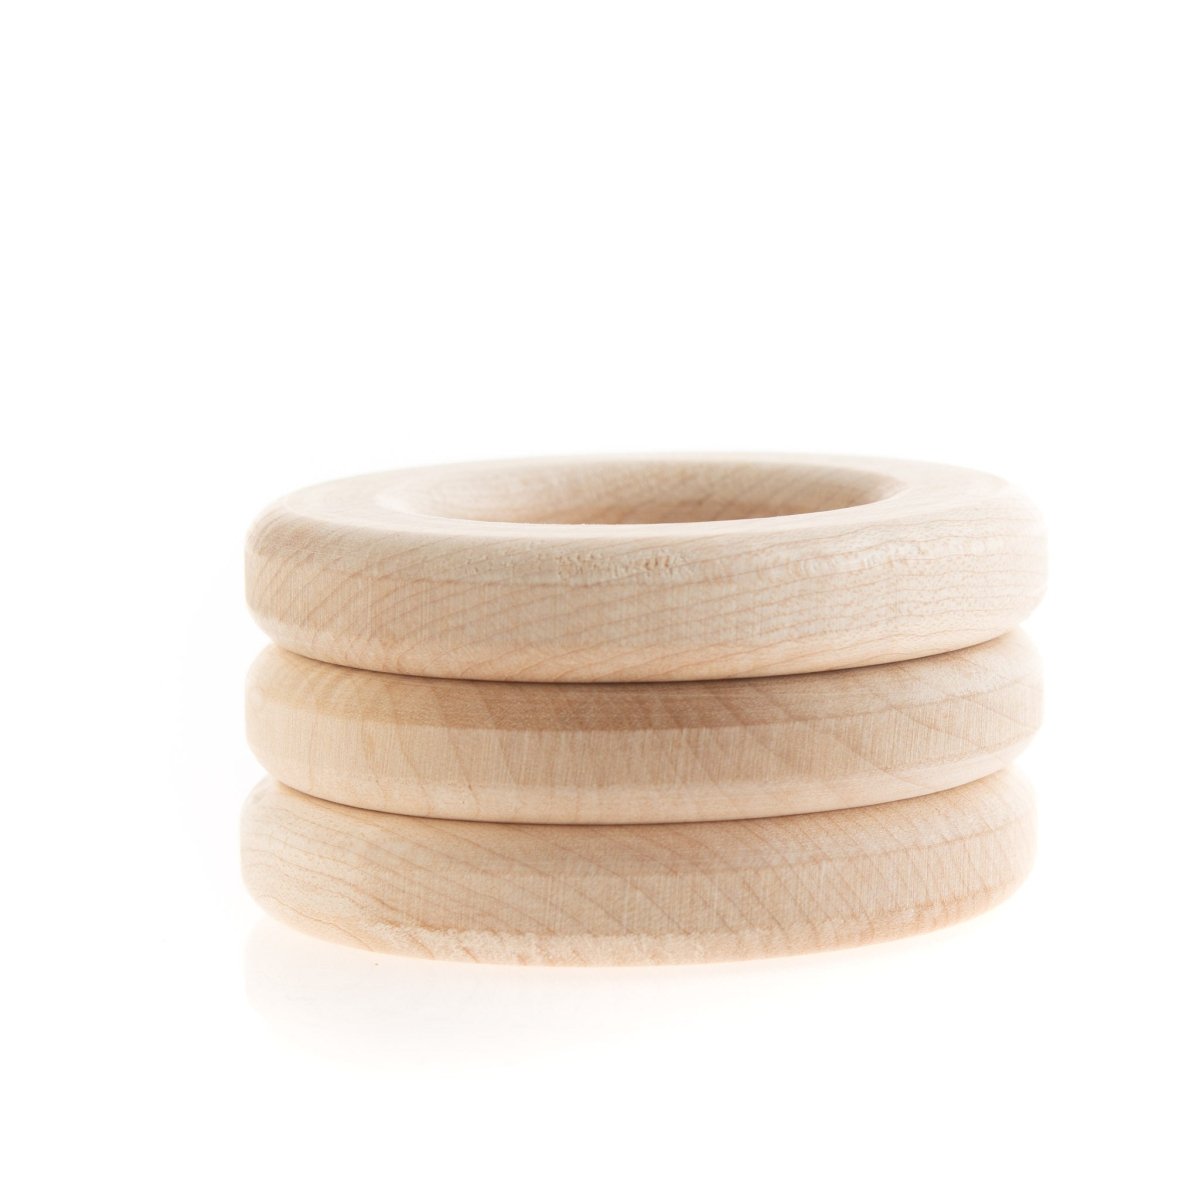 Wood Rings and Pendants Rings - Flat-Faced Maple Wood 2.75" from Cara & Co Craft Supply